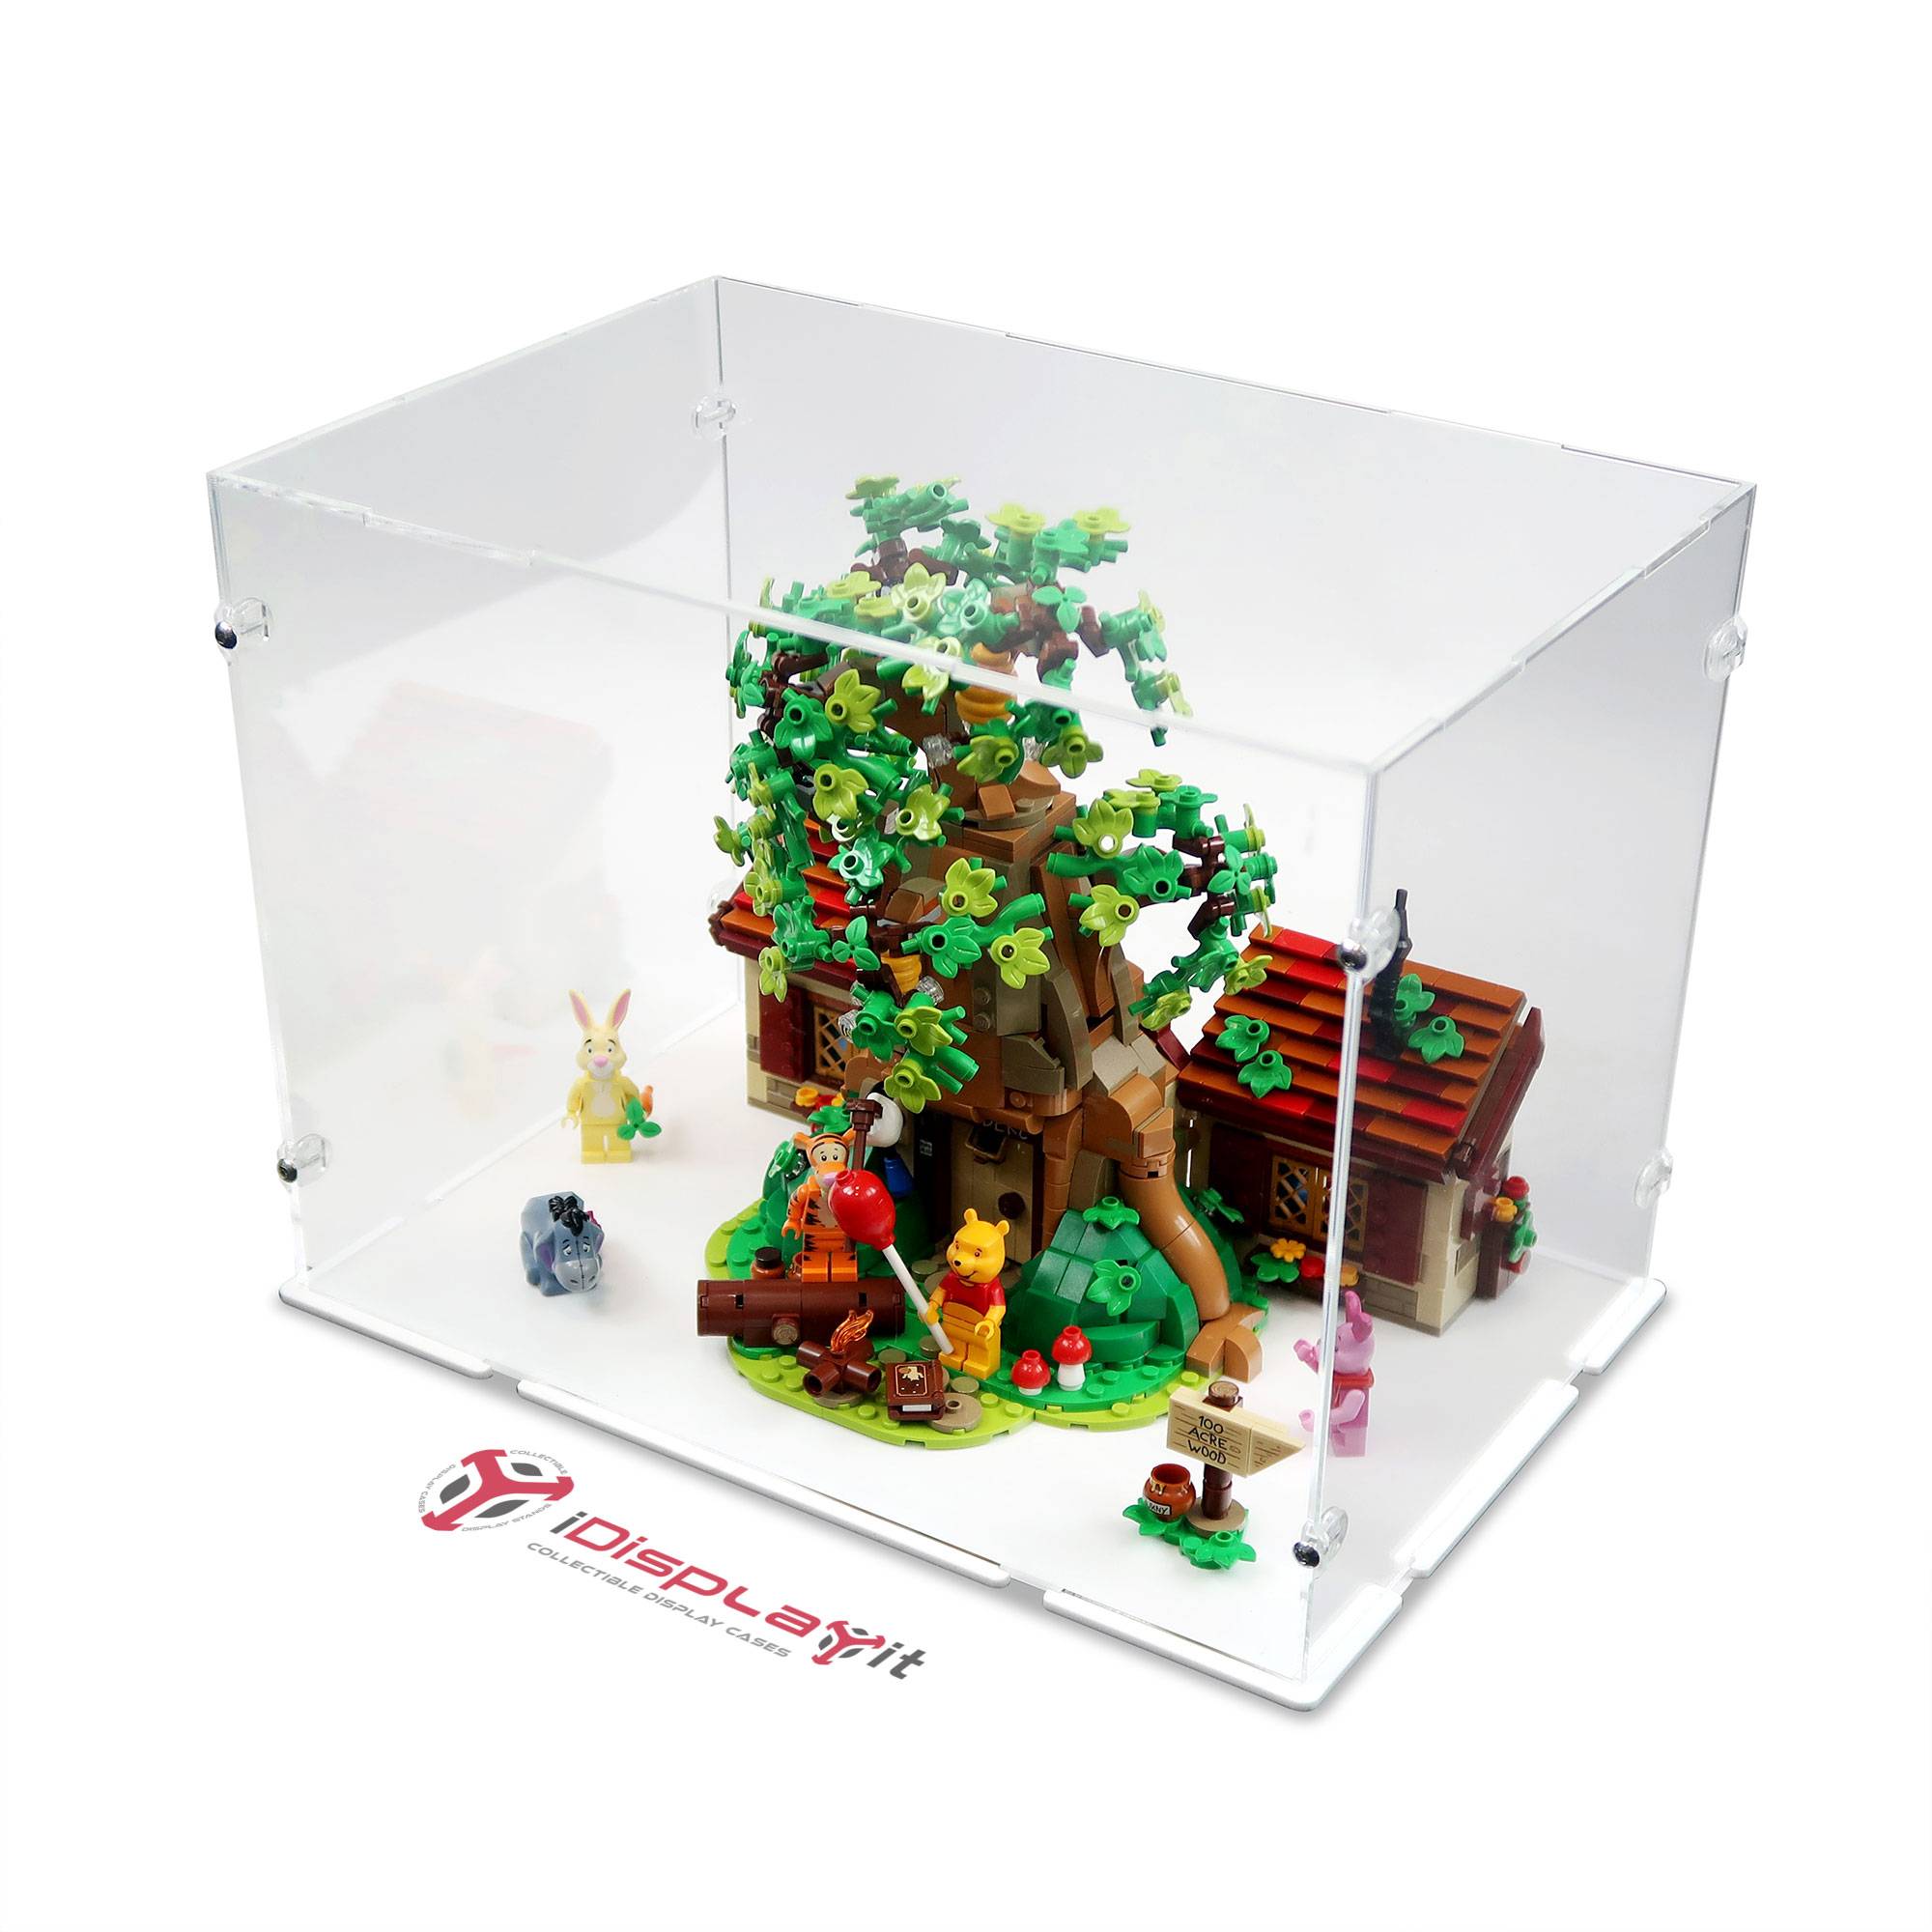 Acrylic Displays for your Lego Models-Lego 21326 Winnie the Pooh